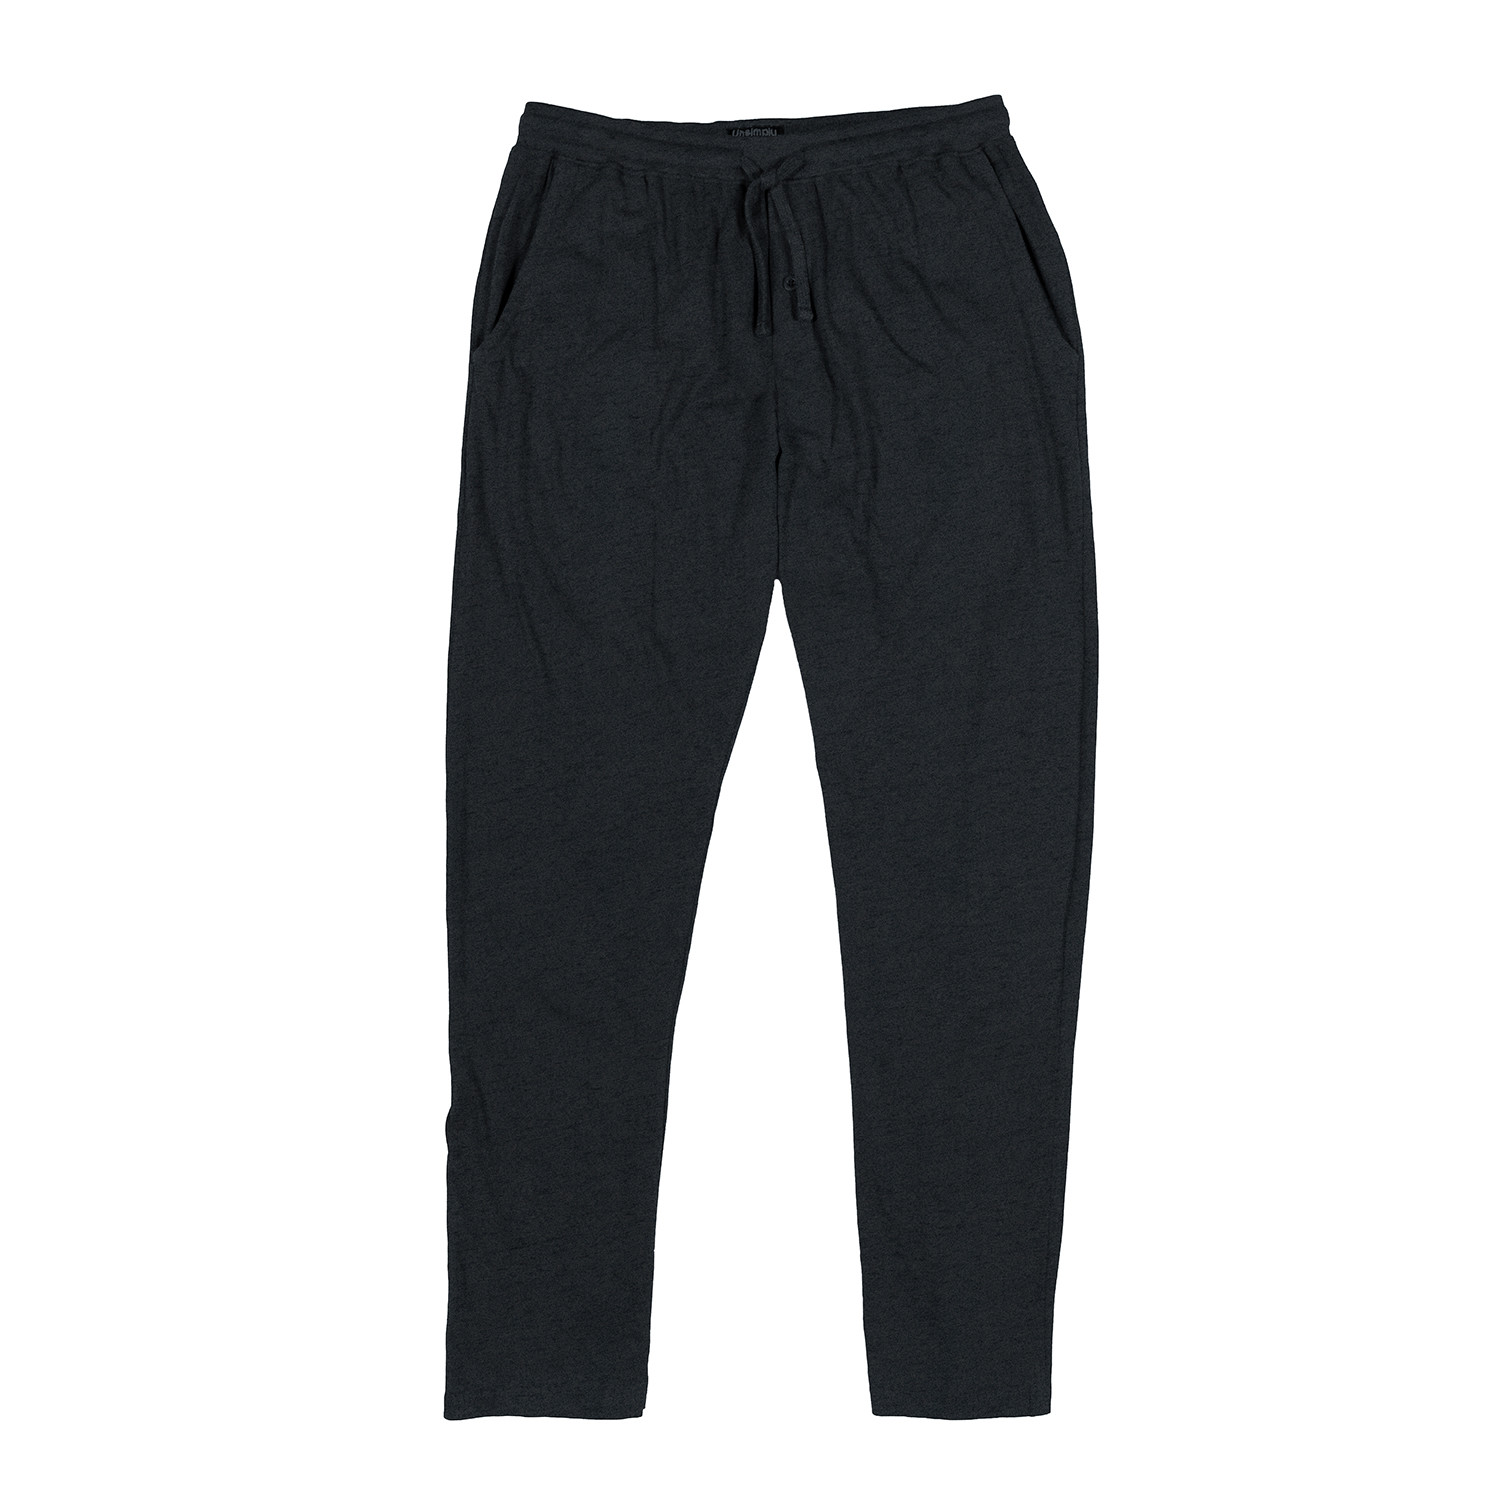 Light Weight Lounge Pant Relax Fit // Black (M) - Unsimply Stitched ...